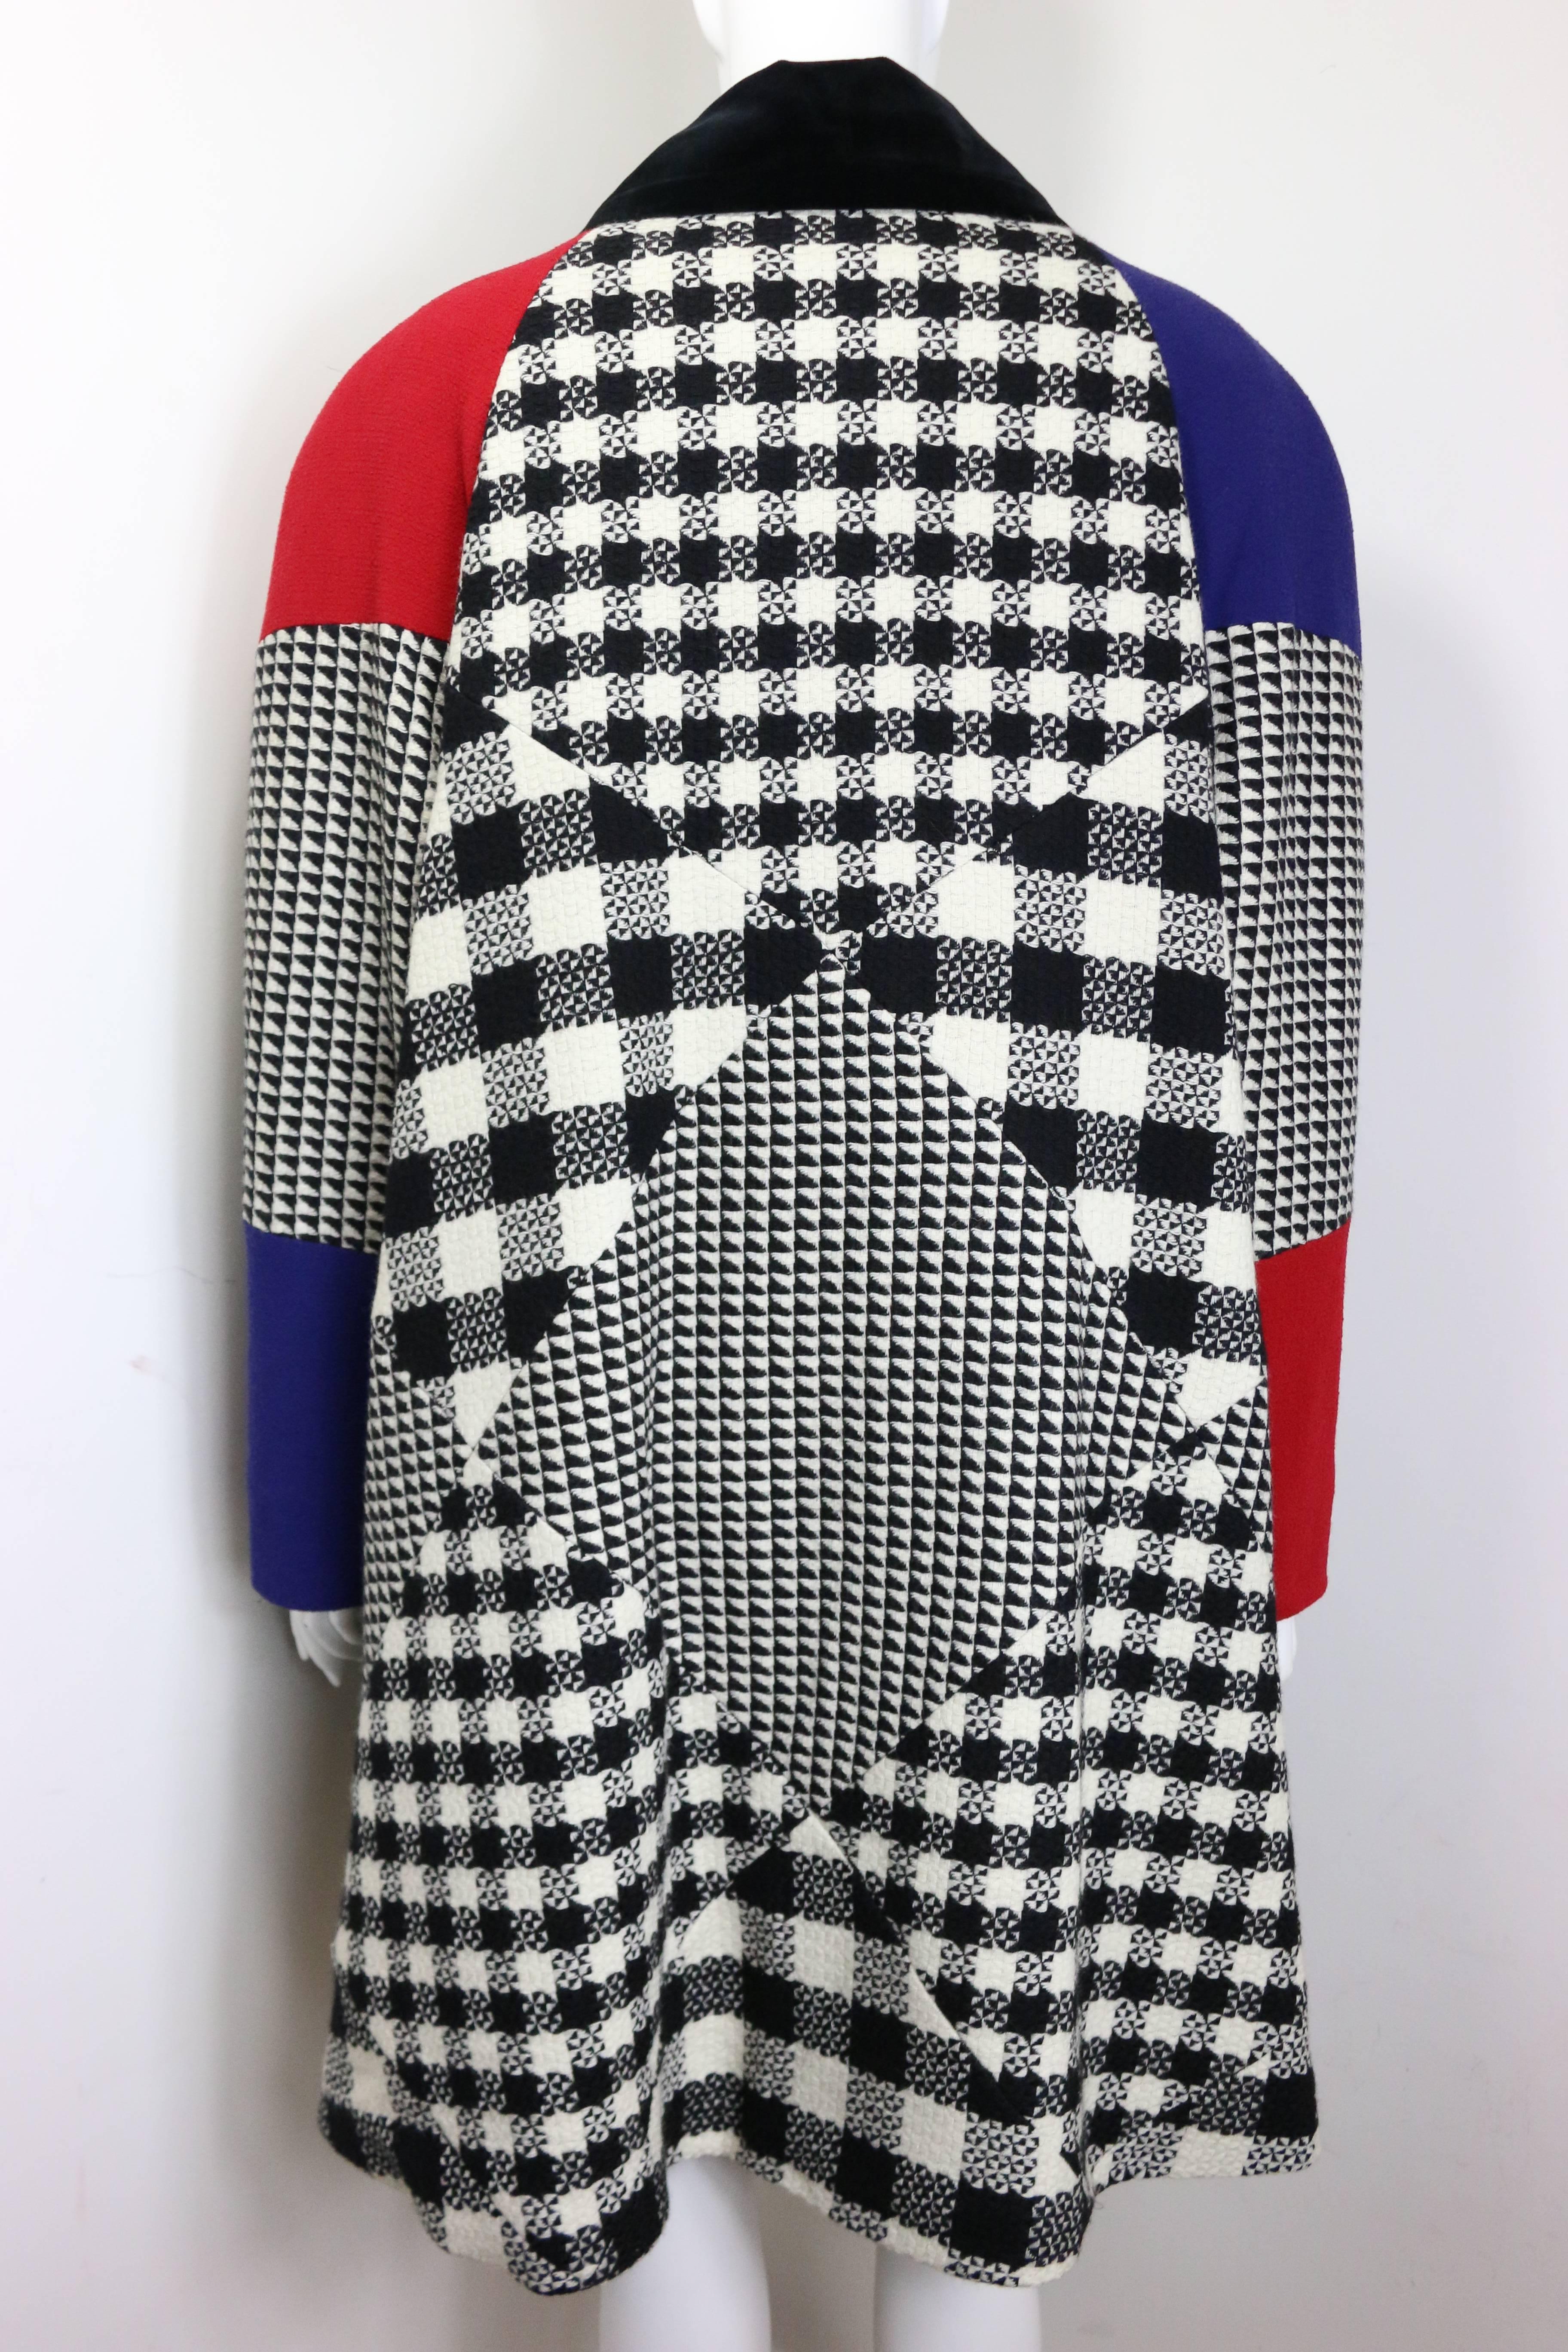 - Vintage 80s Roccobarocco colour blocked (red and blue) with multi black and white check patterns balmacaan coat. 

- Featuring a loose fit, raglan sleeves with four big round black buttons on each cuff. Pointy velvet collar with five font big